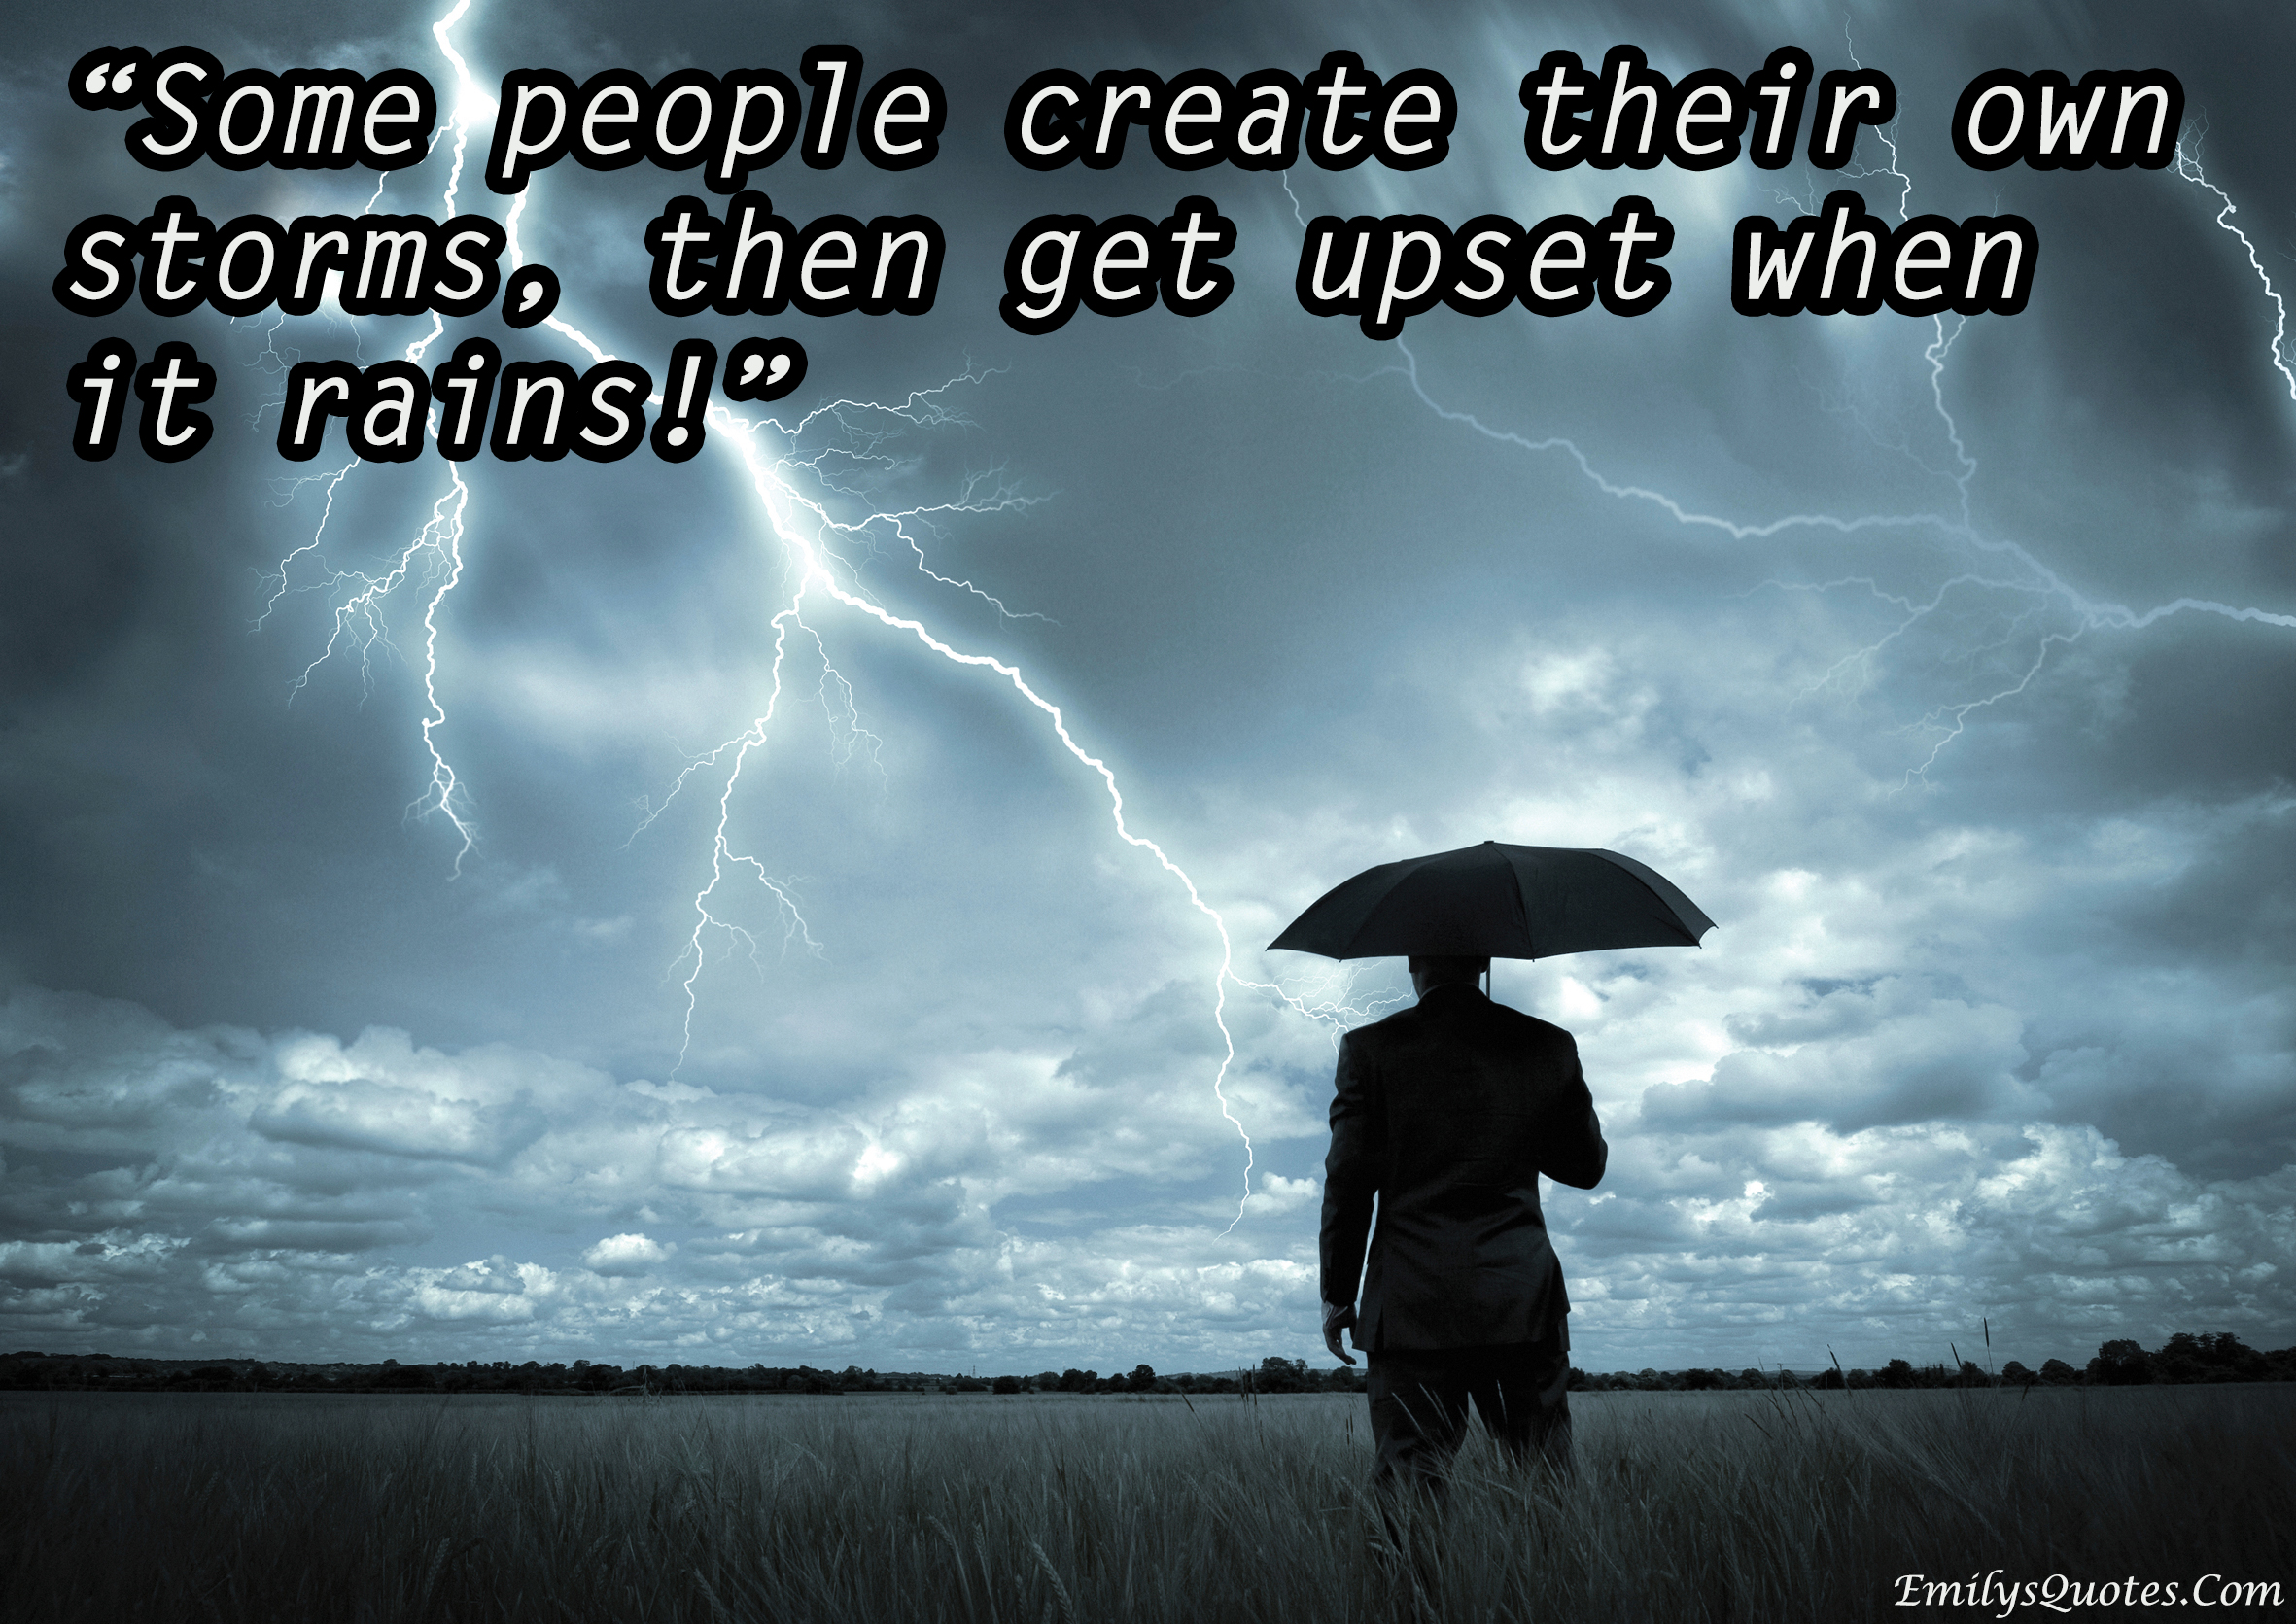 Some people create their own storms, then get upset when it rains